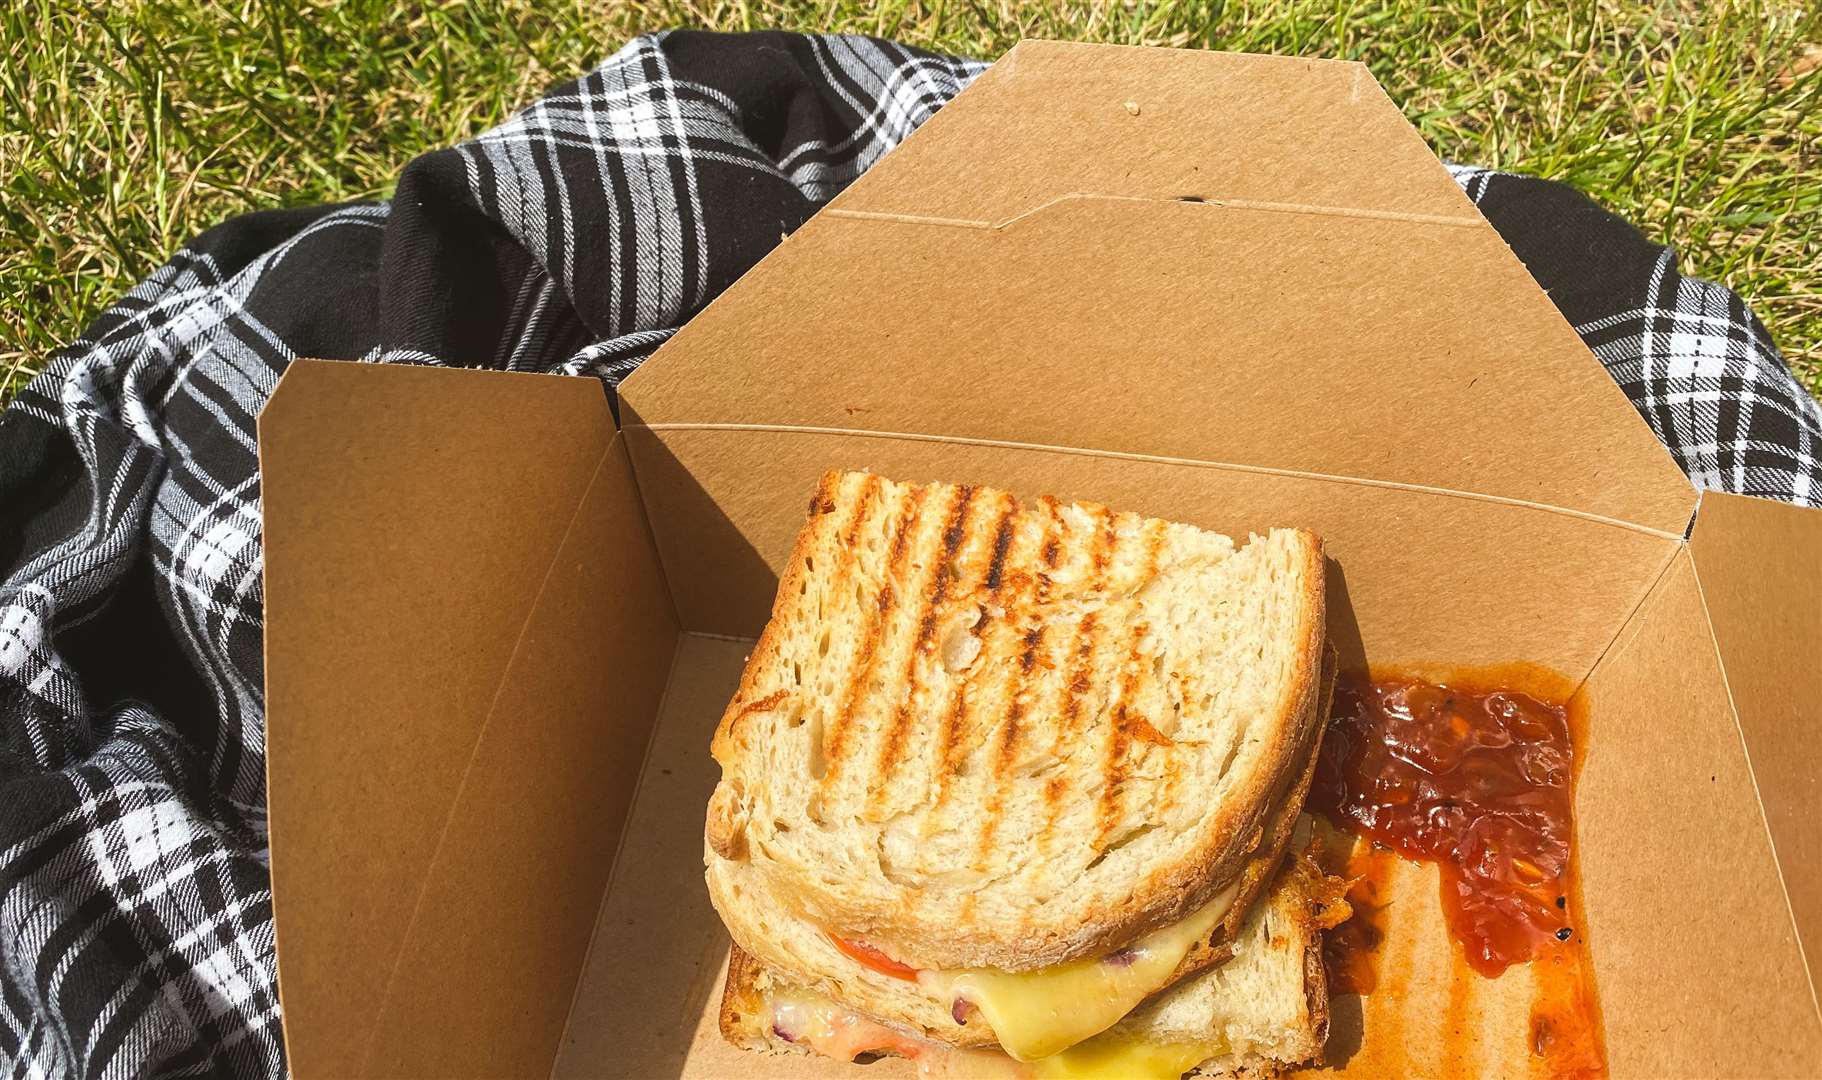 My first sandwich was a classic cheese toastie with a messy dollop of sauce. Picture: Sam Lawrie